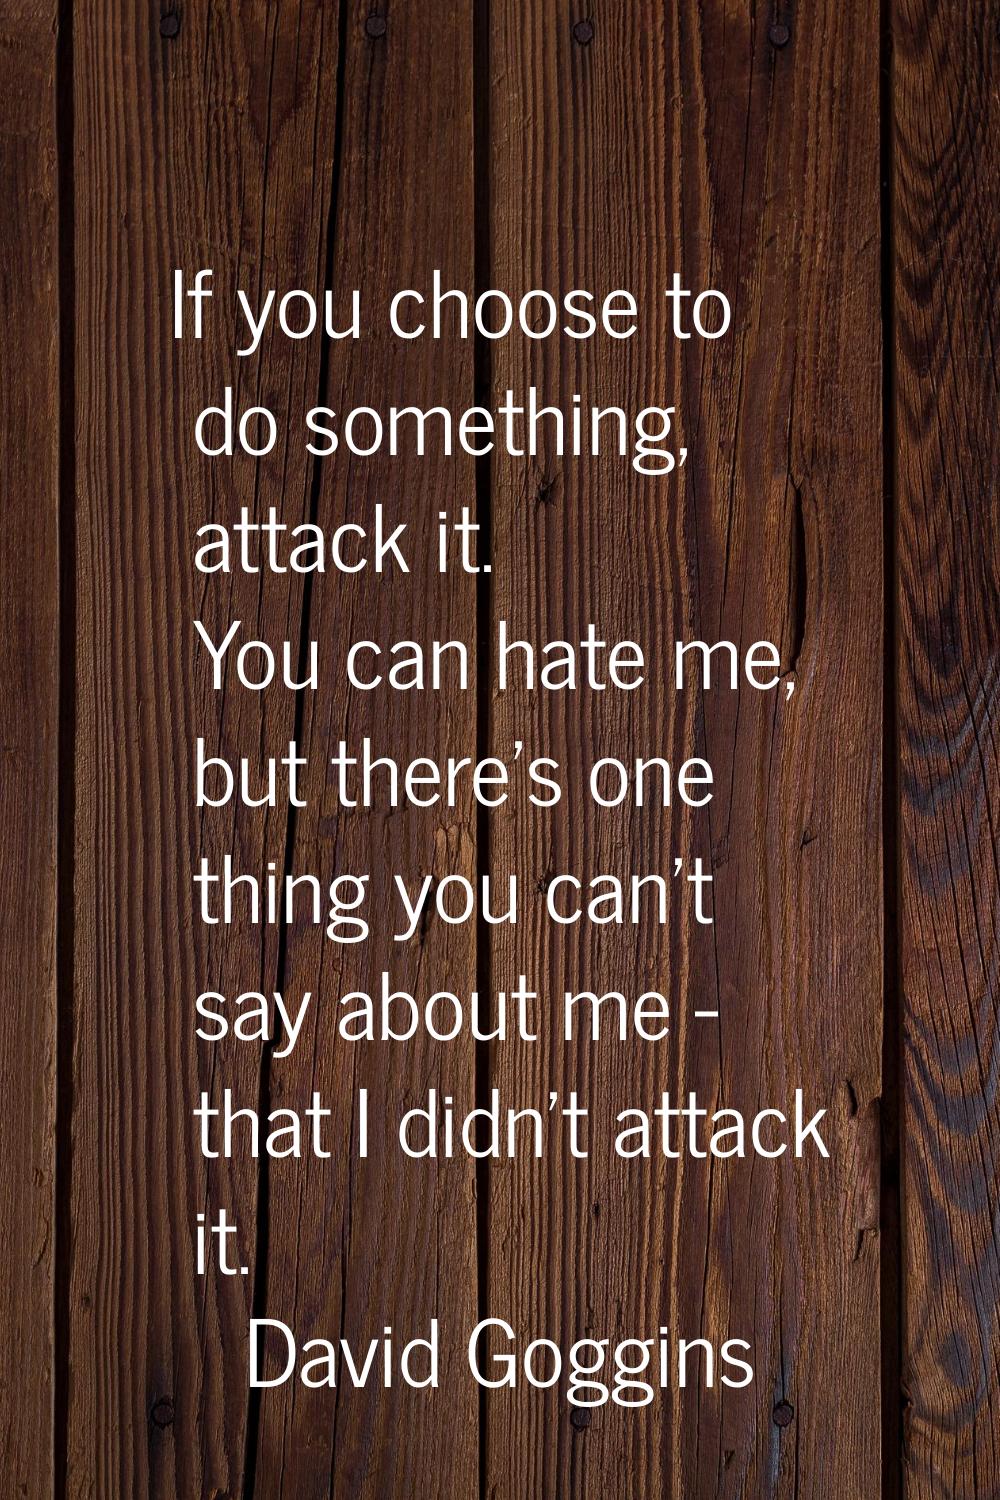 If you choose to do something, attack it. You can hate me, but there's one thing you can't say abou